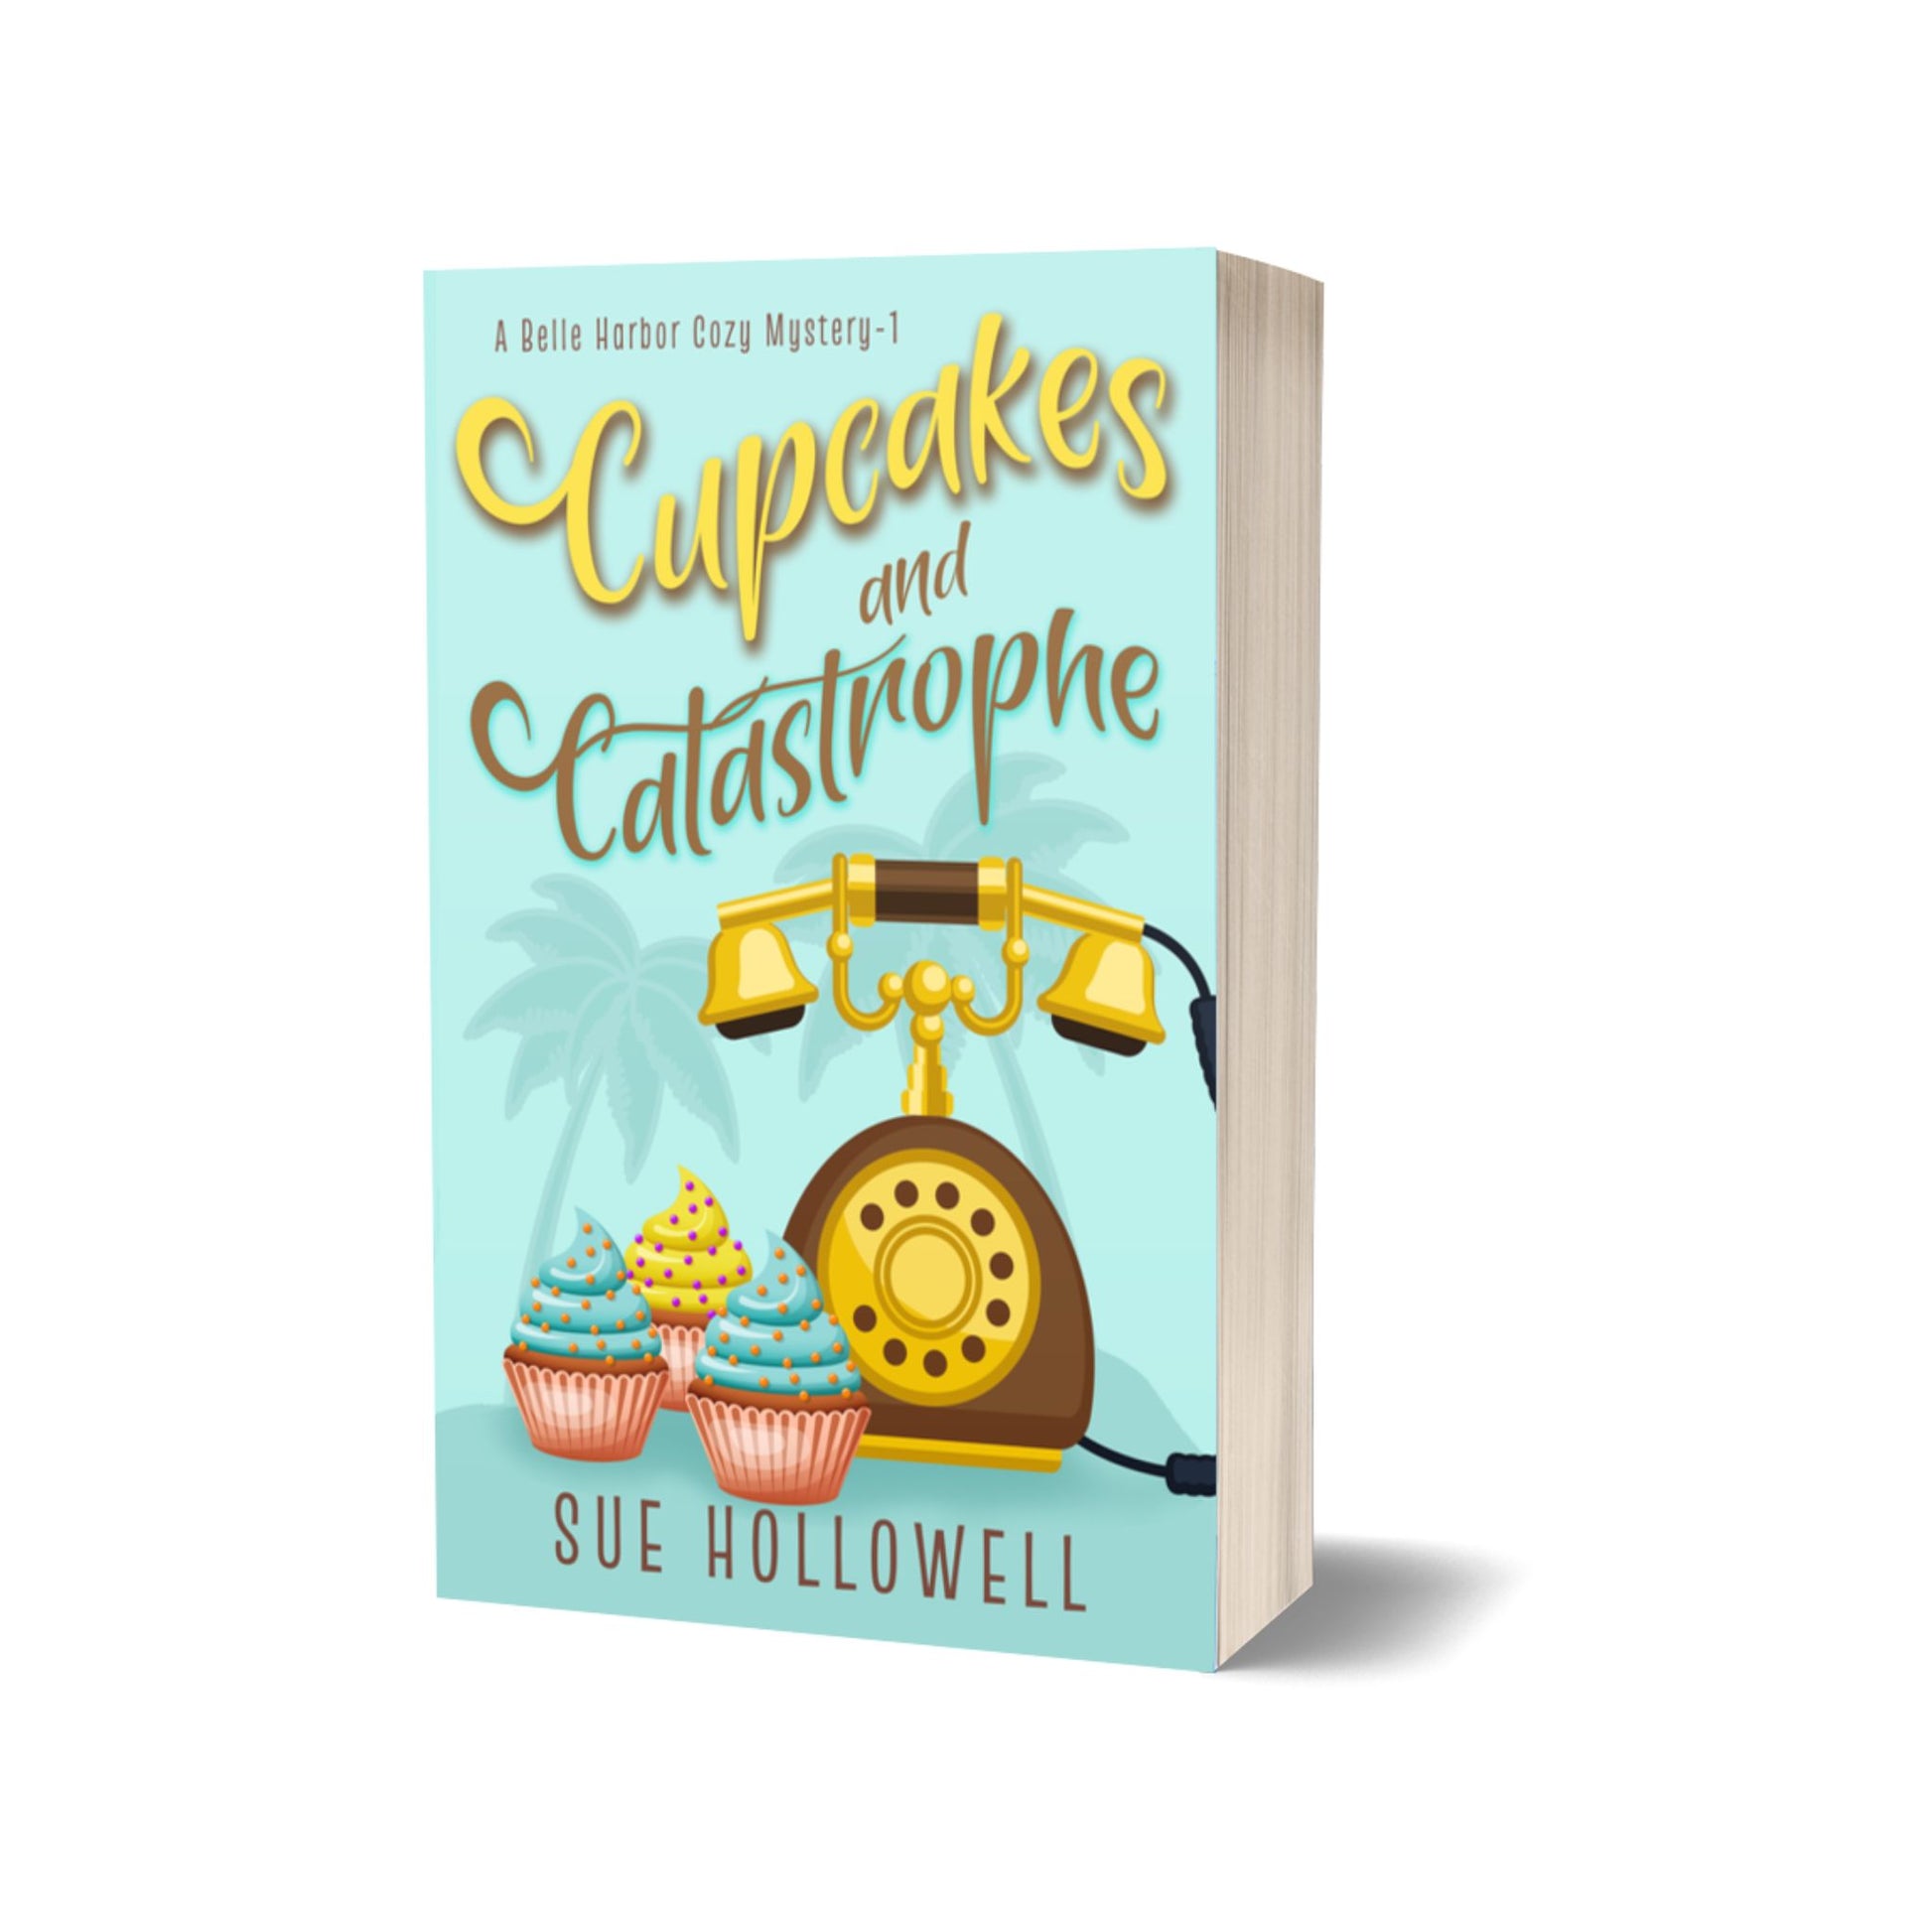 Cupcakes and Catastrophe culinary cozy mystery